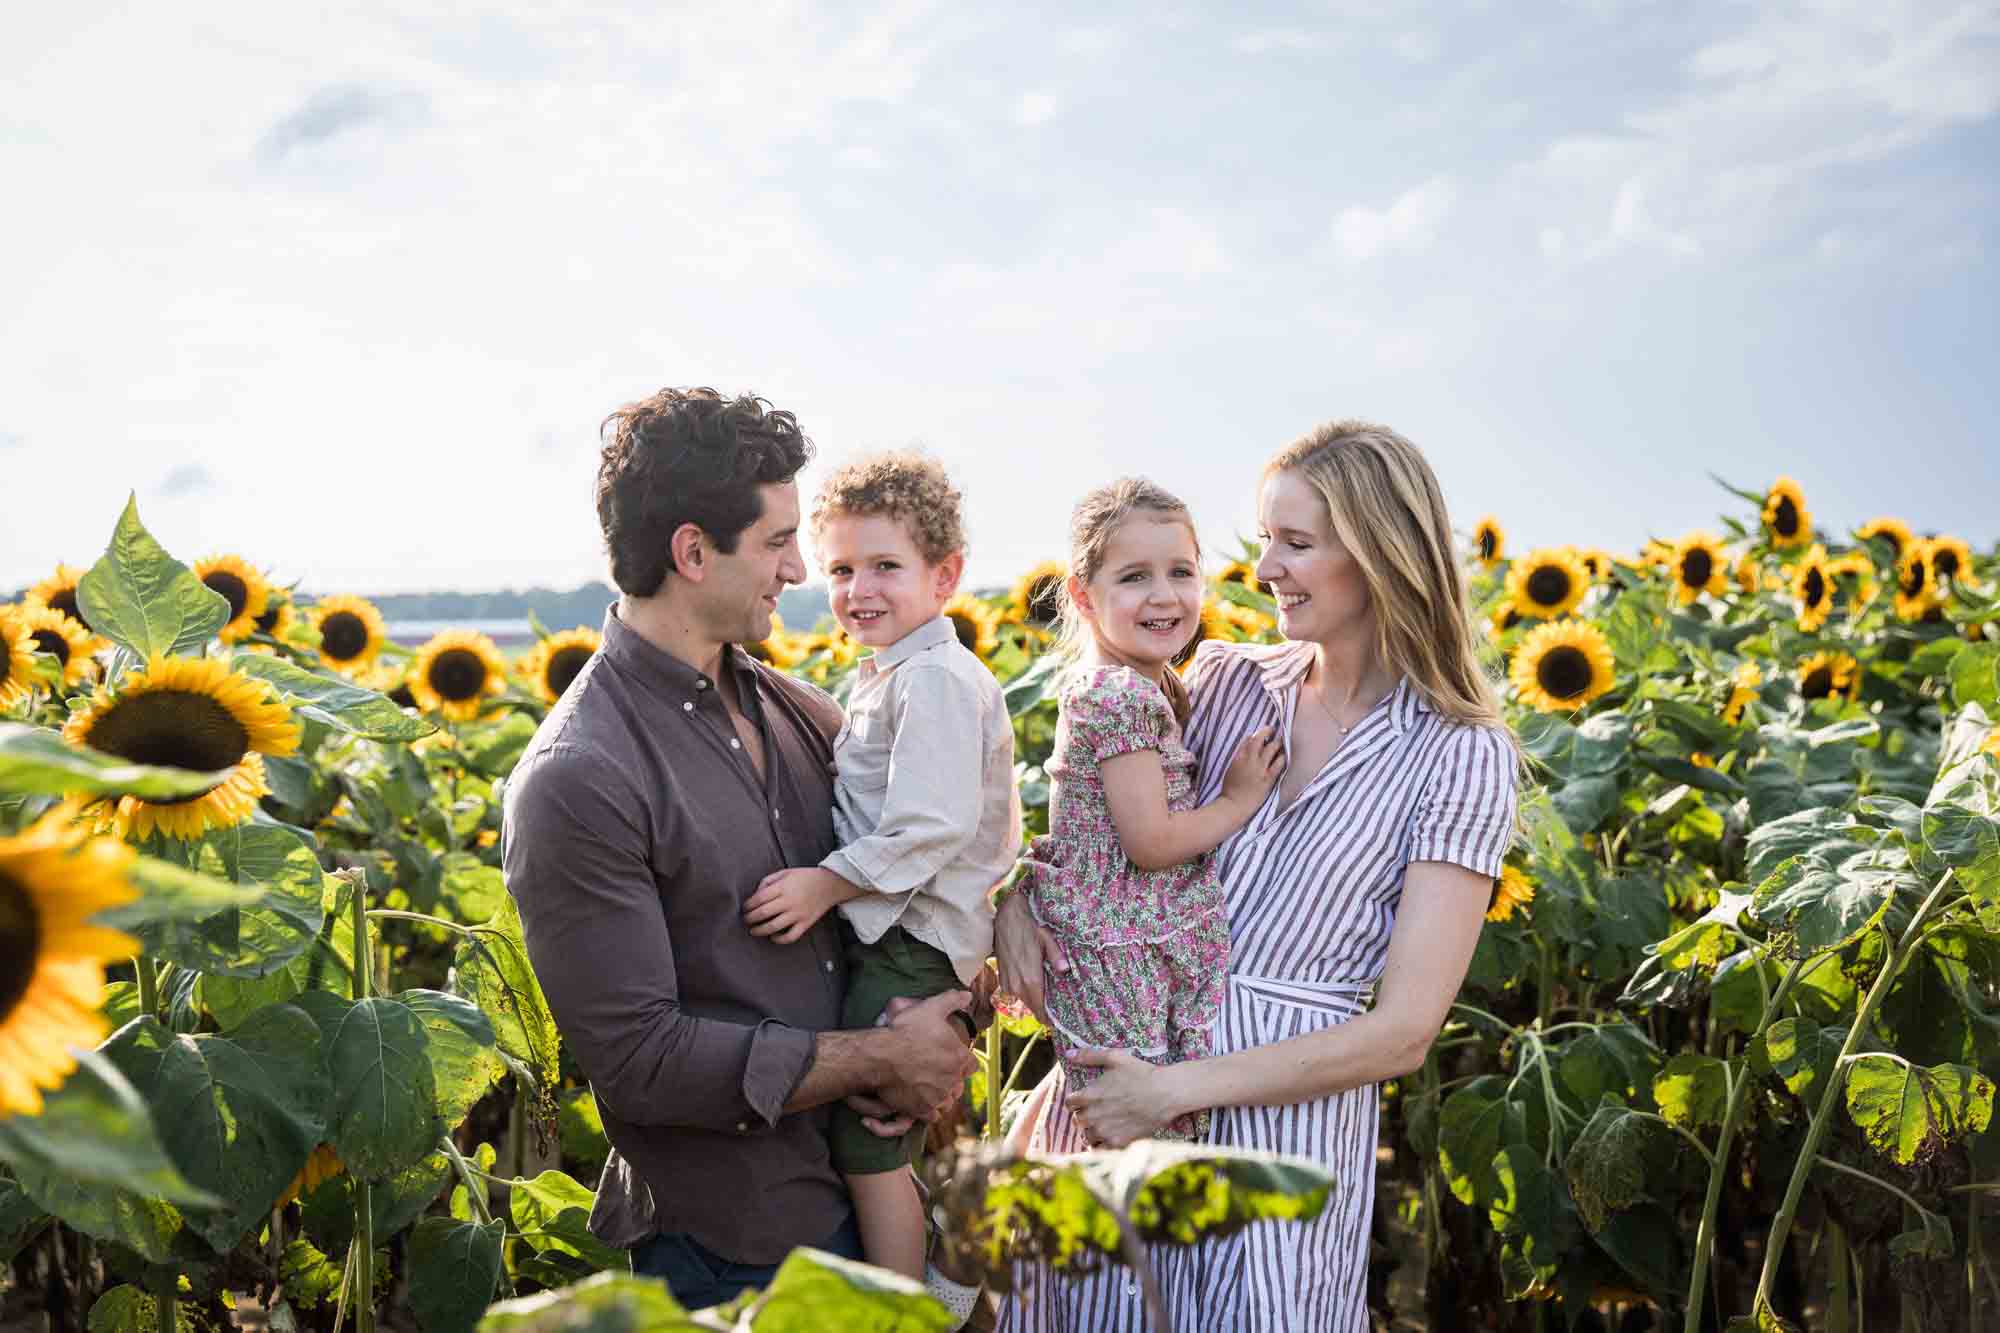 Parents holding two small children in sunflower patch 